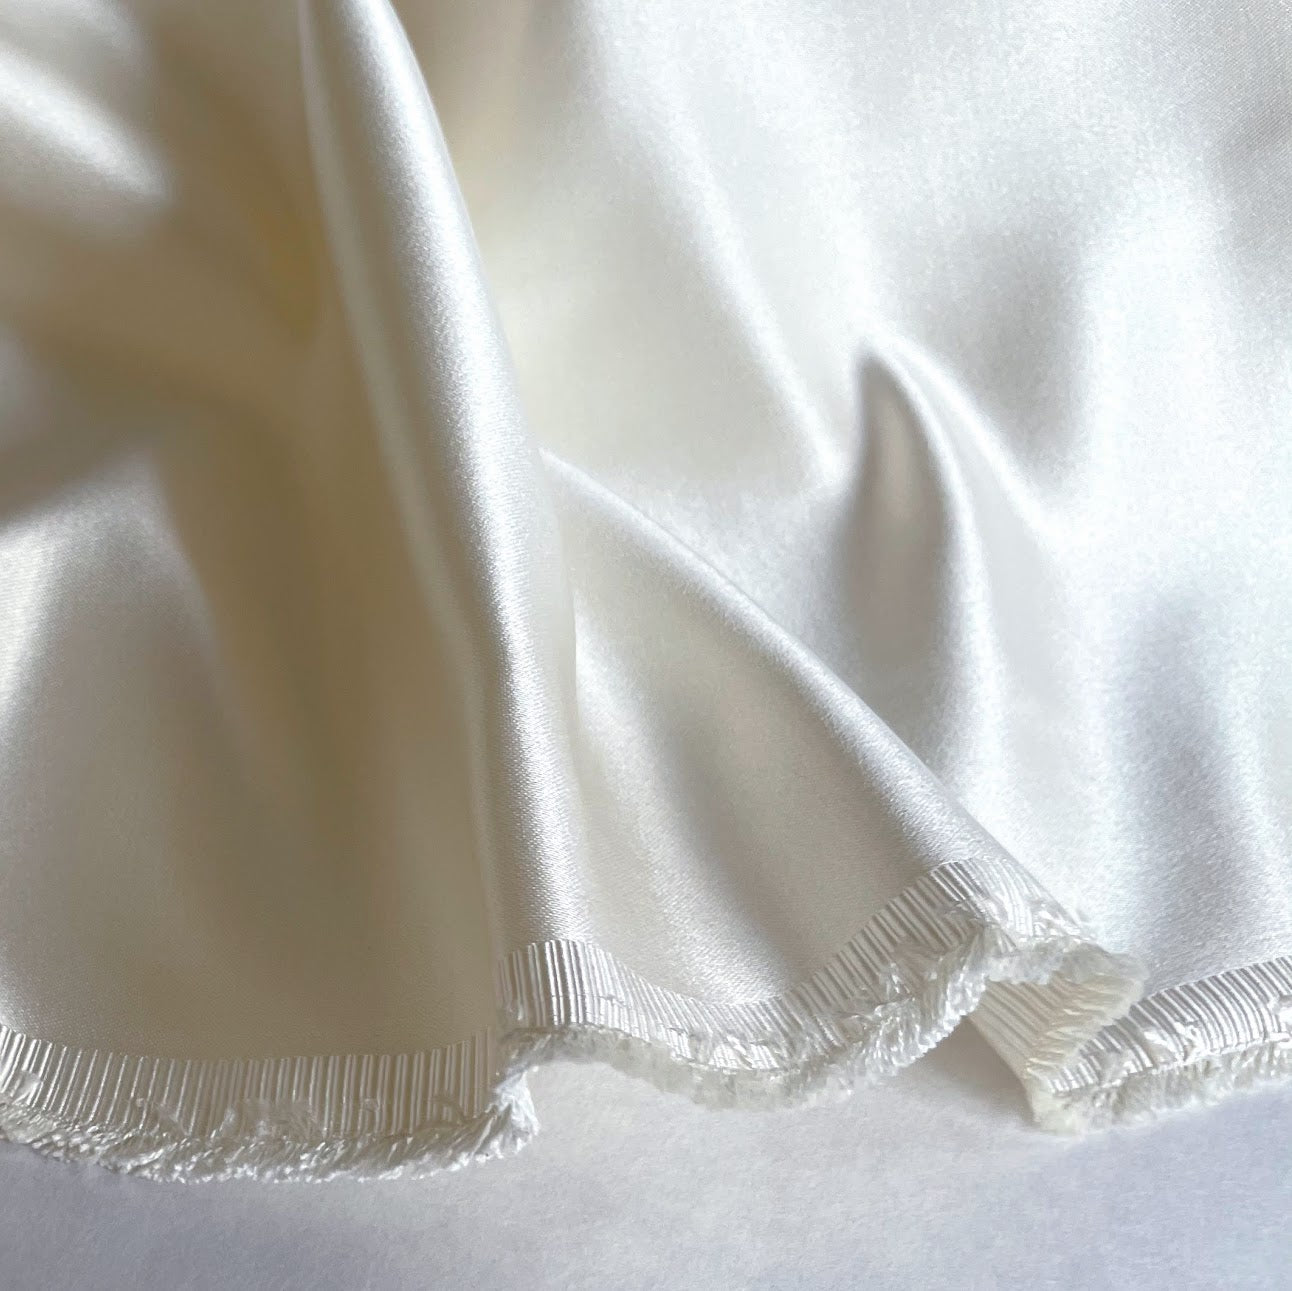 Double Face Duchess Satin - 100% Silk - Ivory / Off-White - Extra Heavy 35mm - Extra Wide 60"